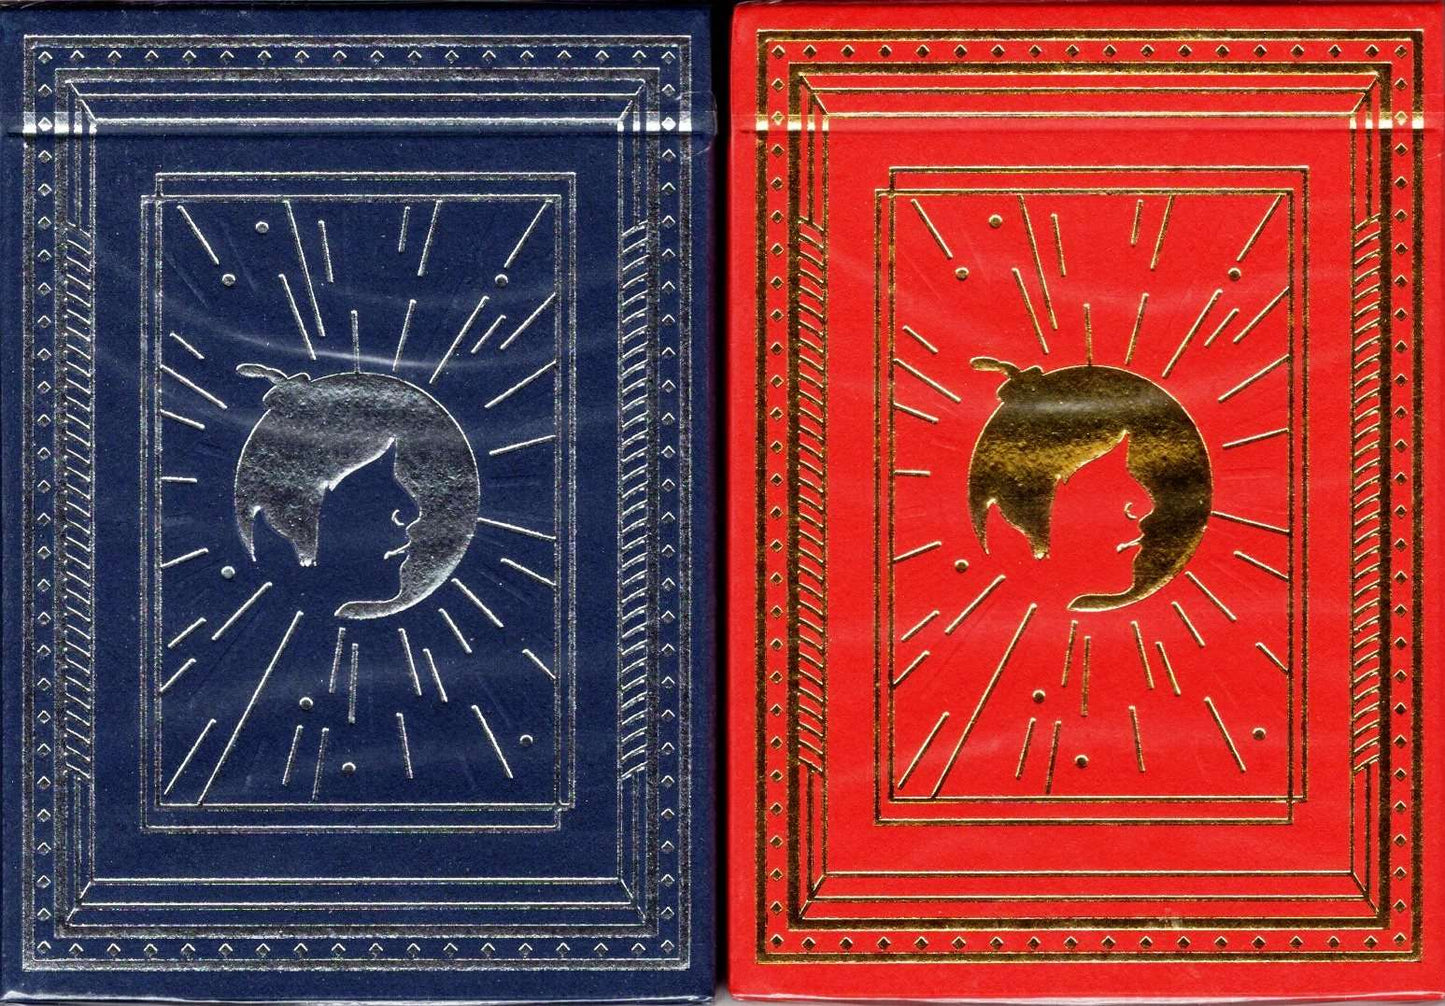 PlayingCardDecks.com-Bomber Collector's 2 Deck Set Blue & Red Playing Cards